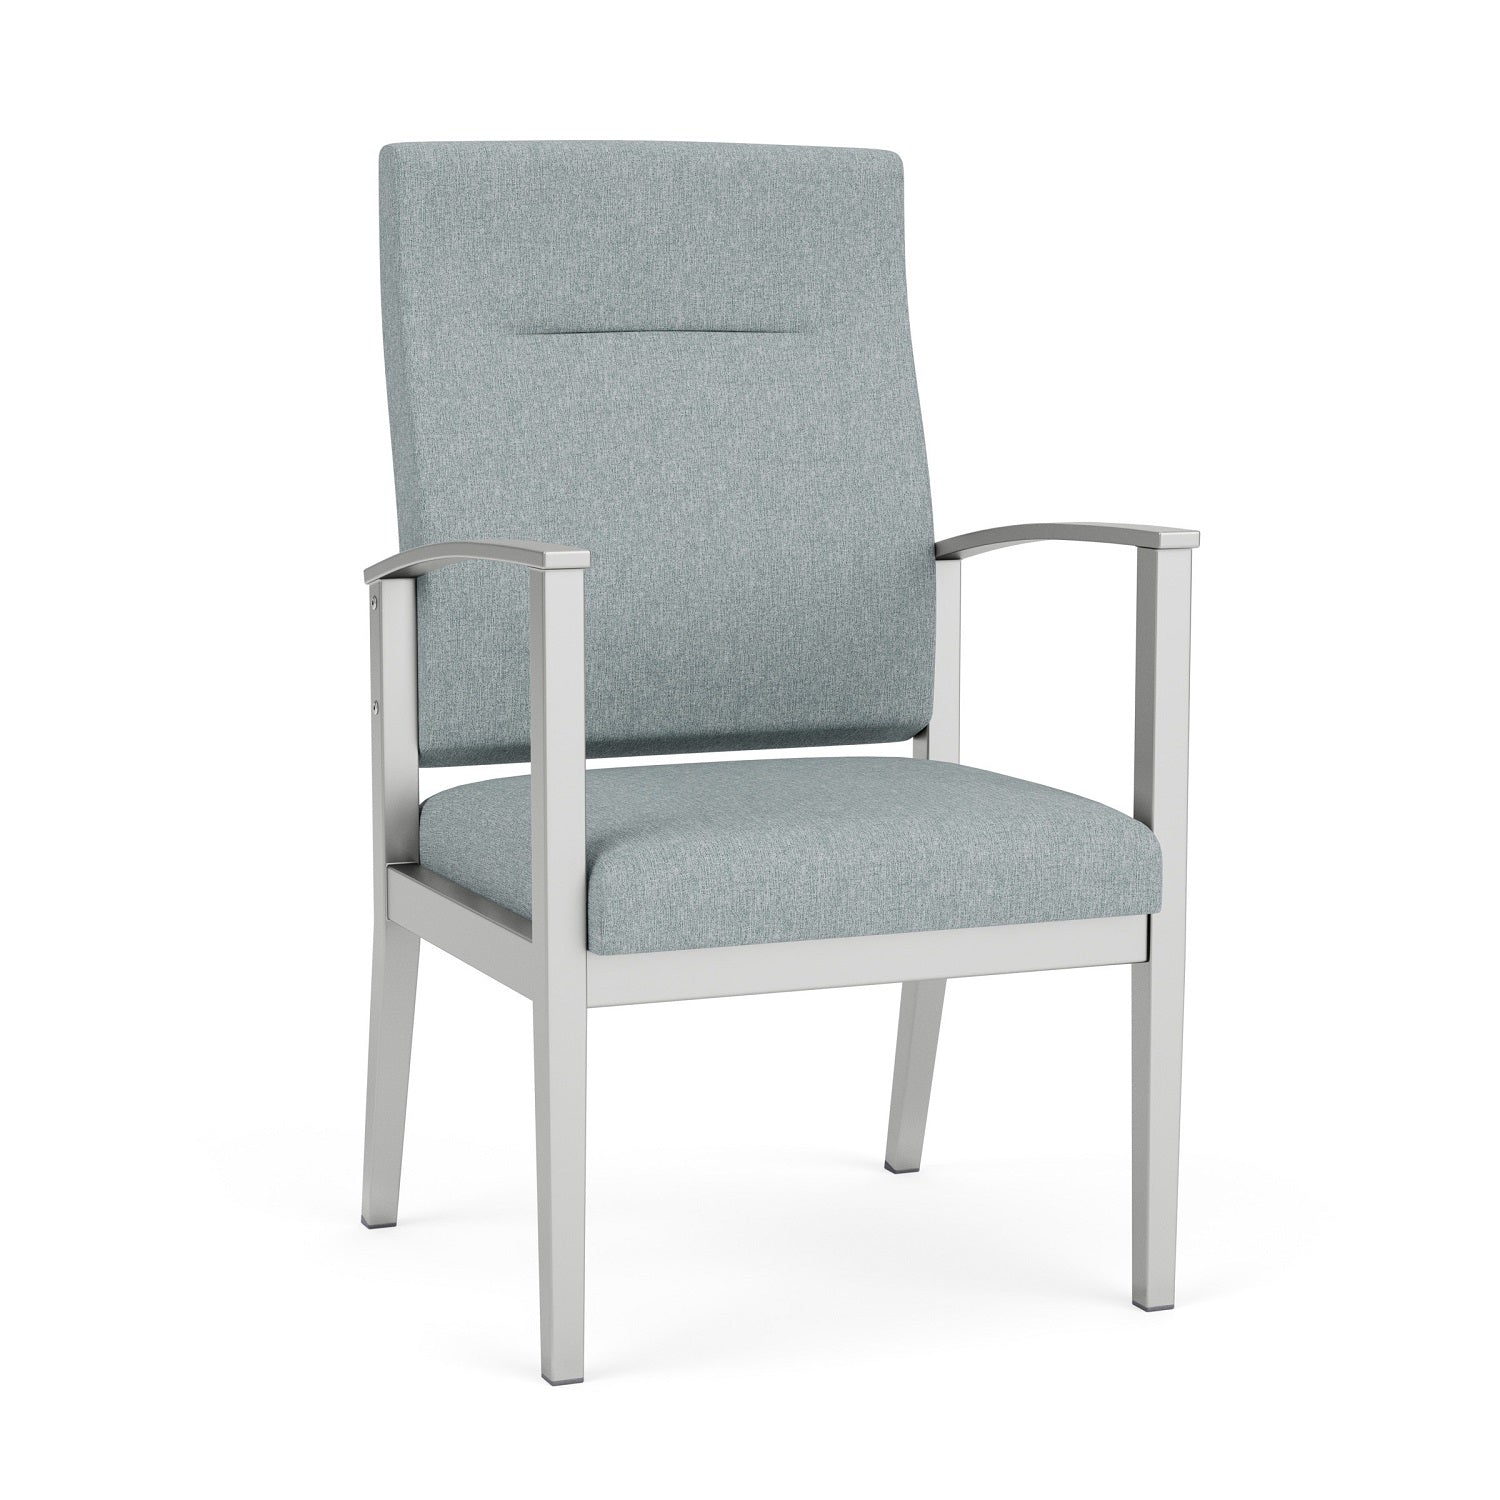 Amherst Steel Collection Reception Seating, Patient Chair, High Back, Healthcare Vinyl Upholstery, FREE SHIPPING